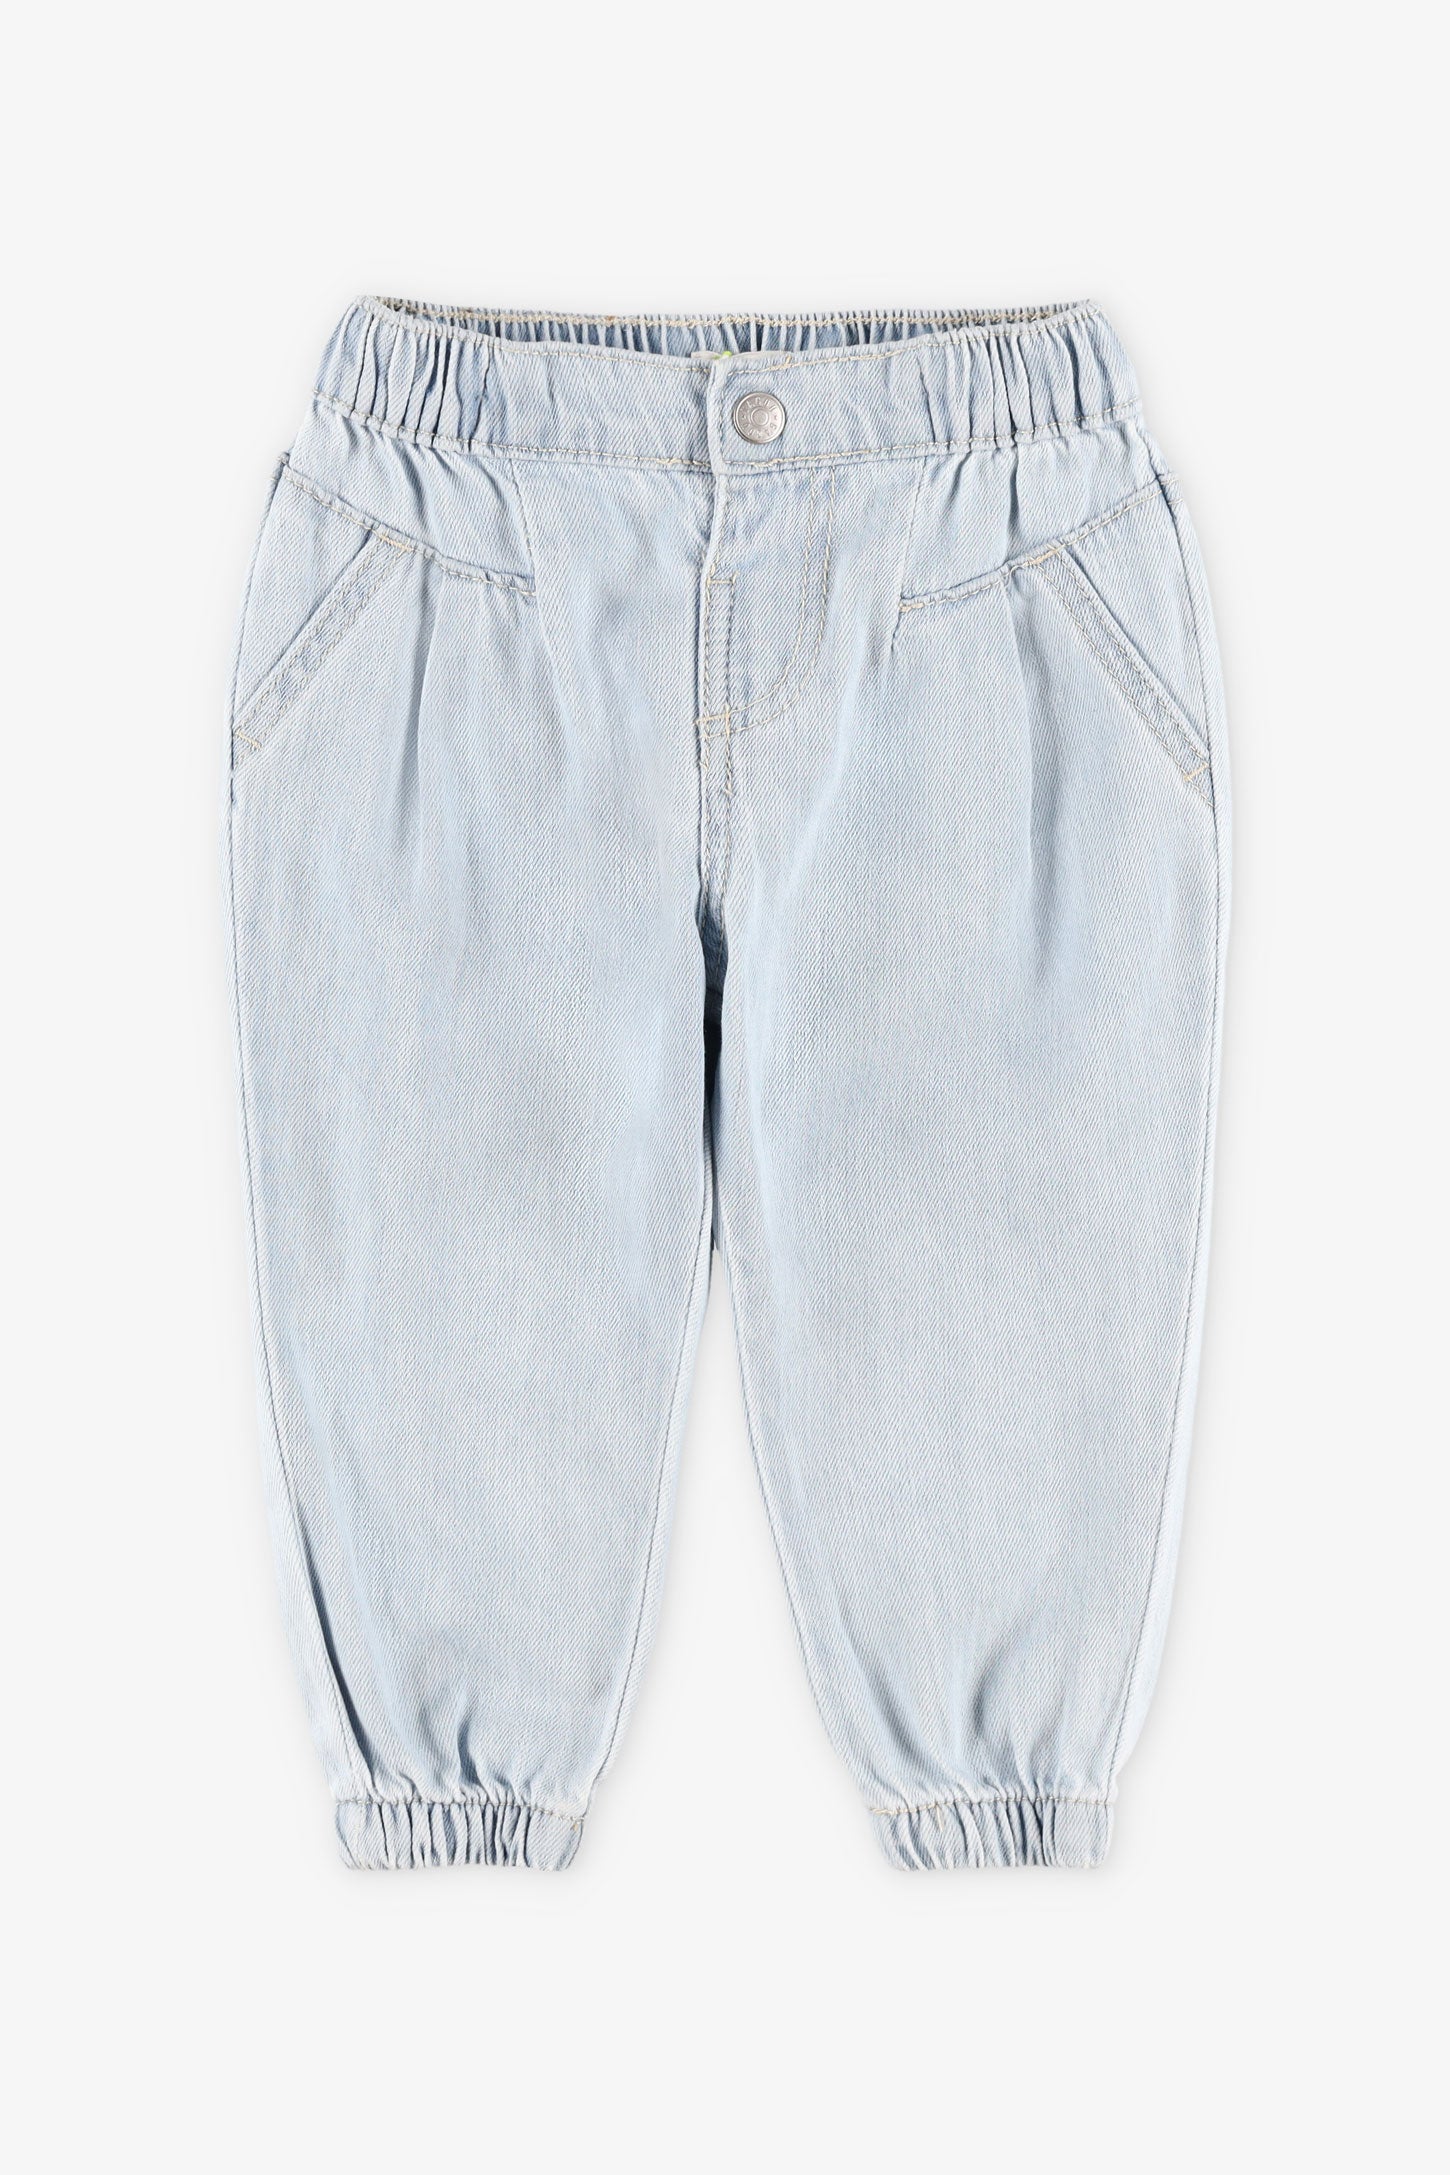 Jogger cut jeans - Baby girl